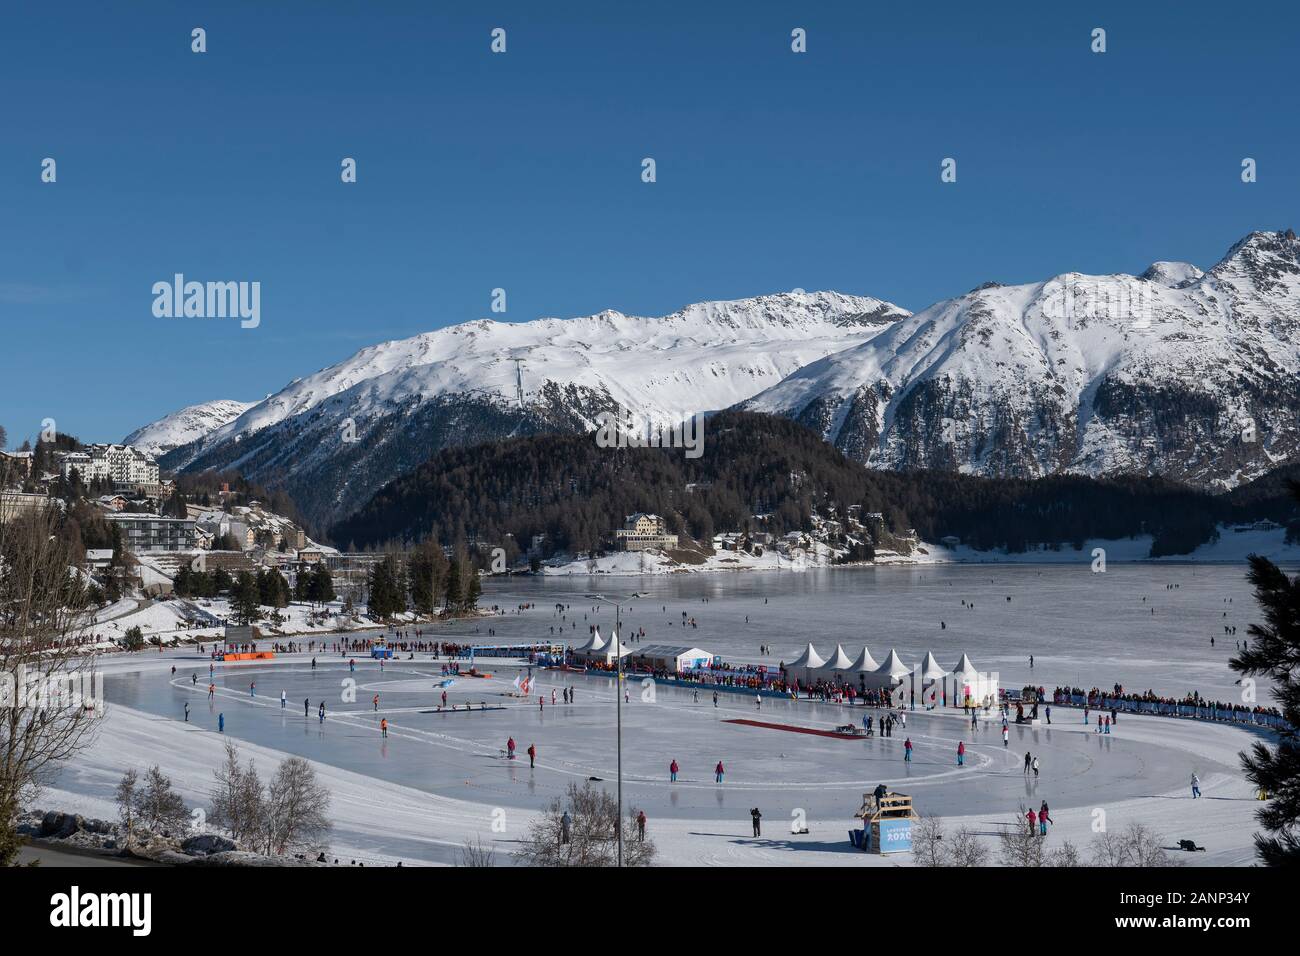 The Lausanne 2020 Youth Olympic Games on the 12h January 2020 at Lake St  Moritz in Switzerland. Photo by Sam Mellish Stock Photo - Alamy